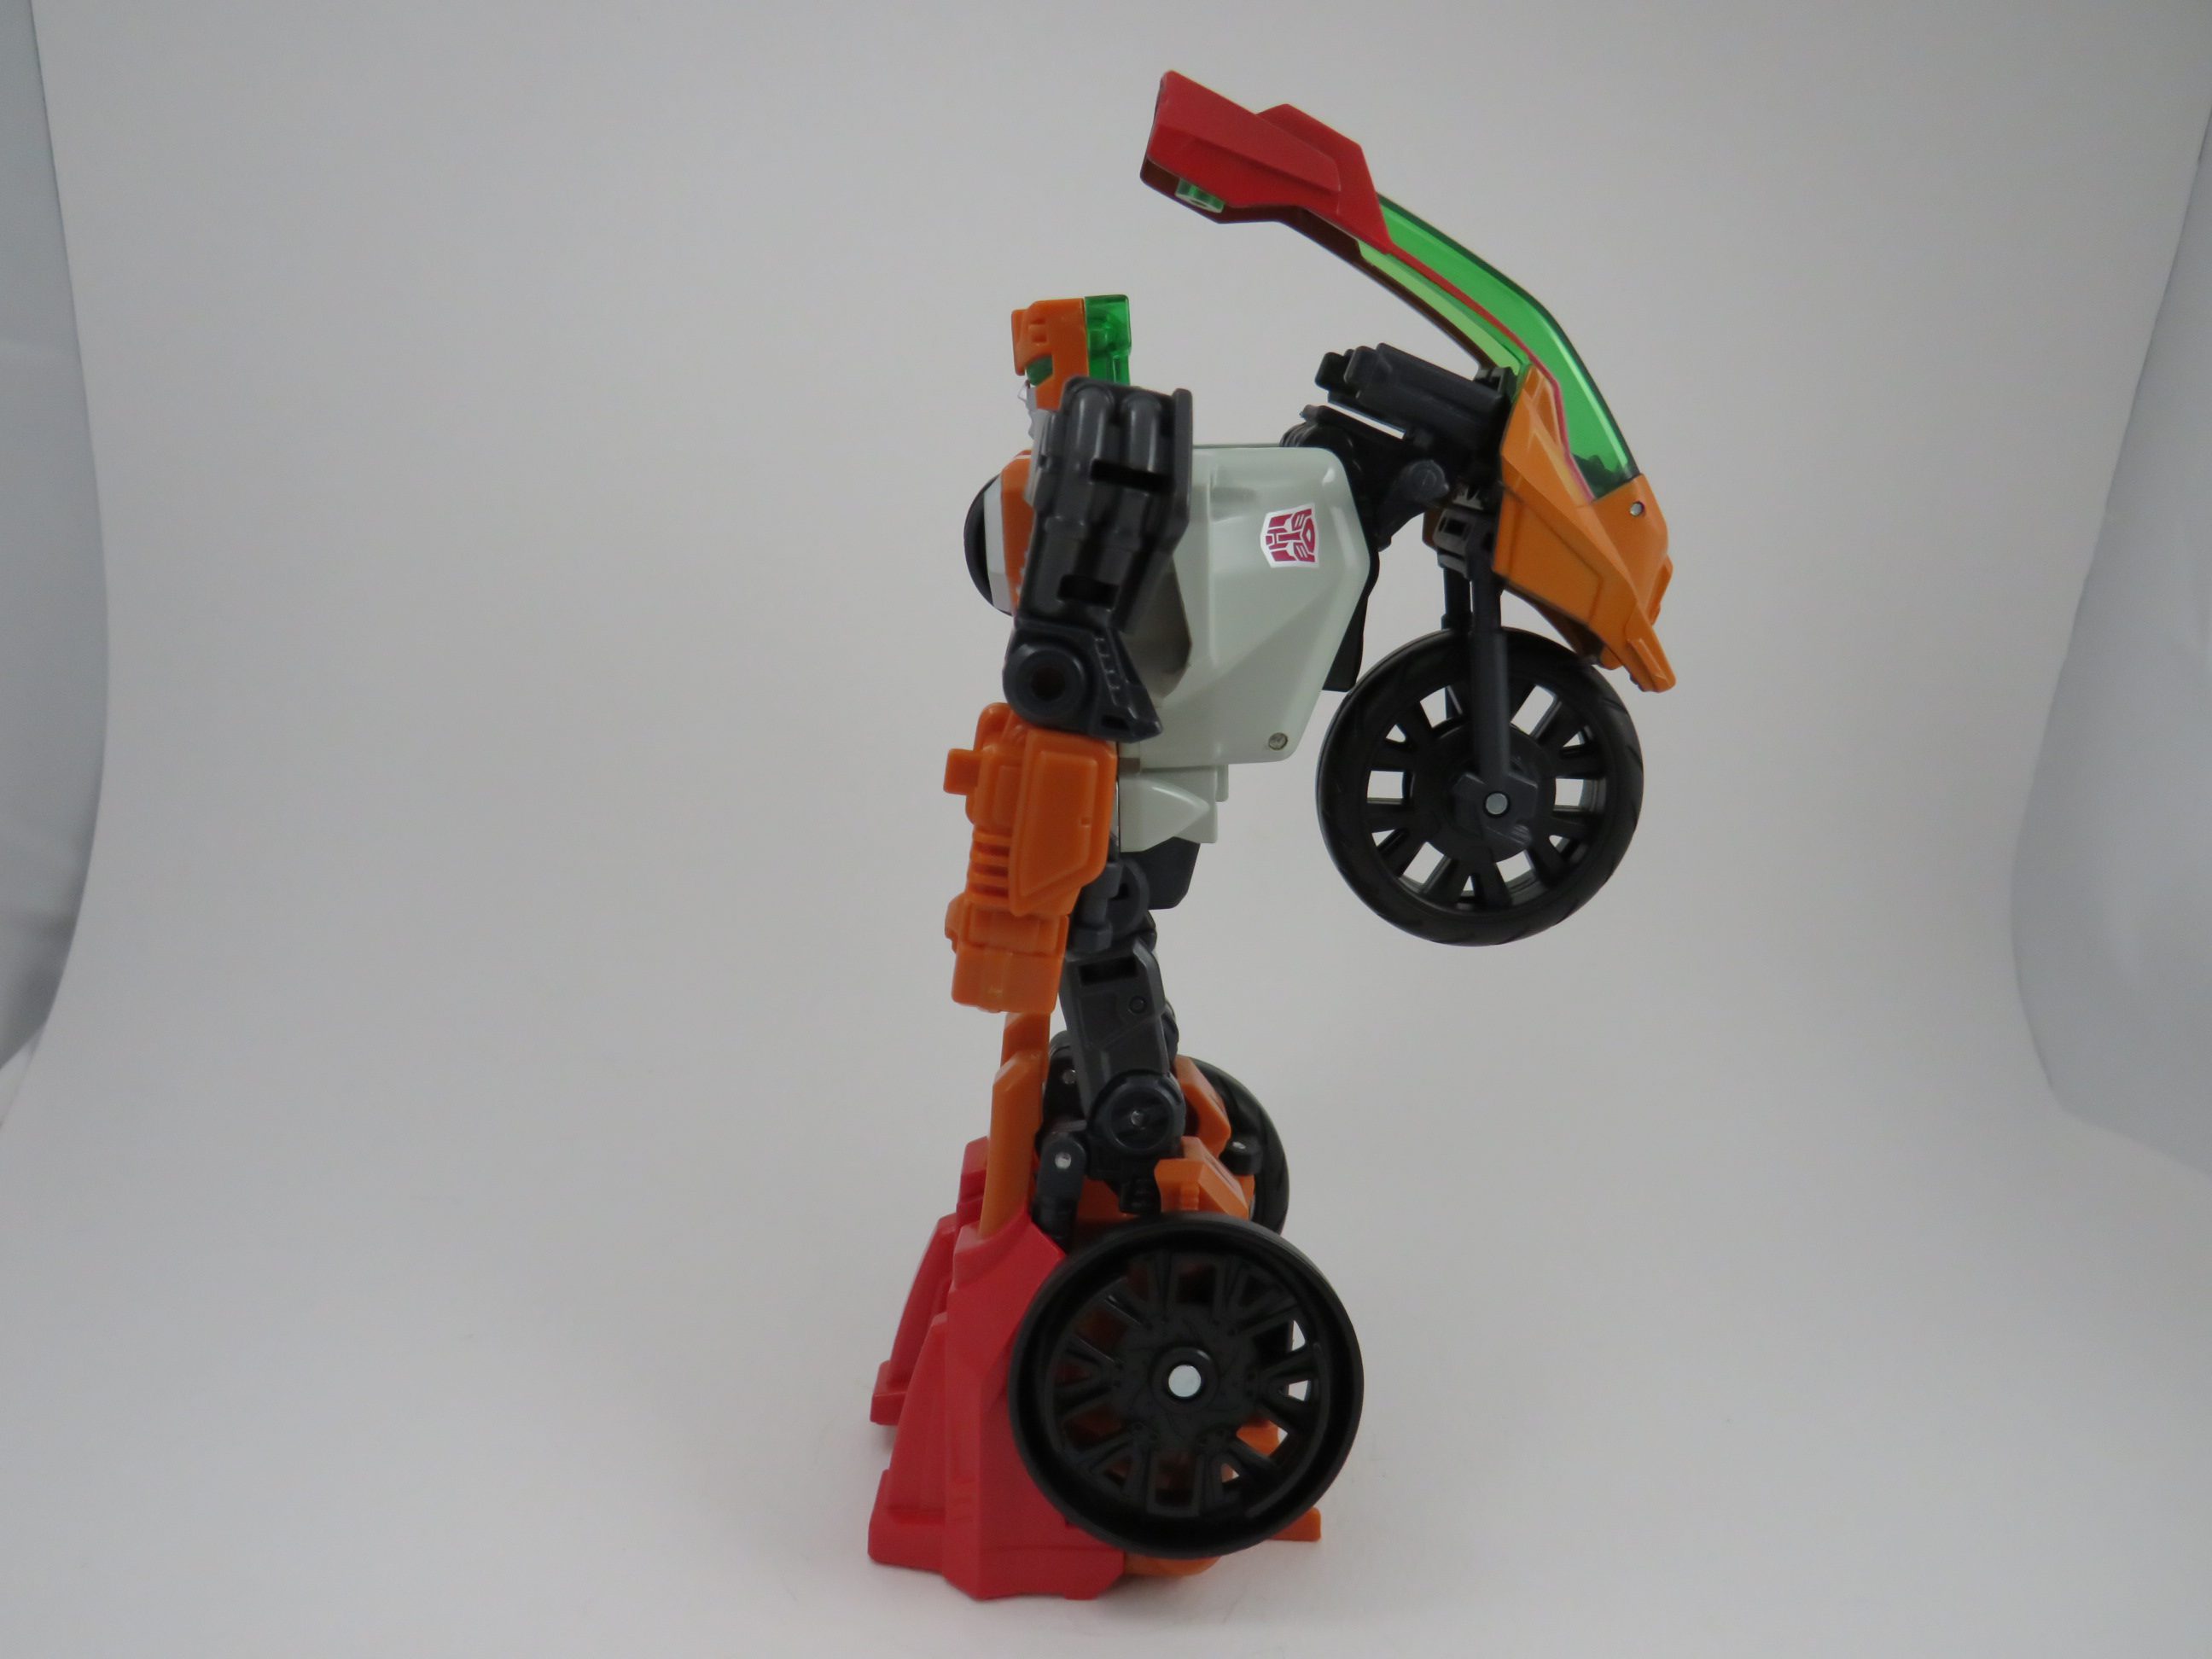 Robot mode (Afterbreaker from the Computron gift set)